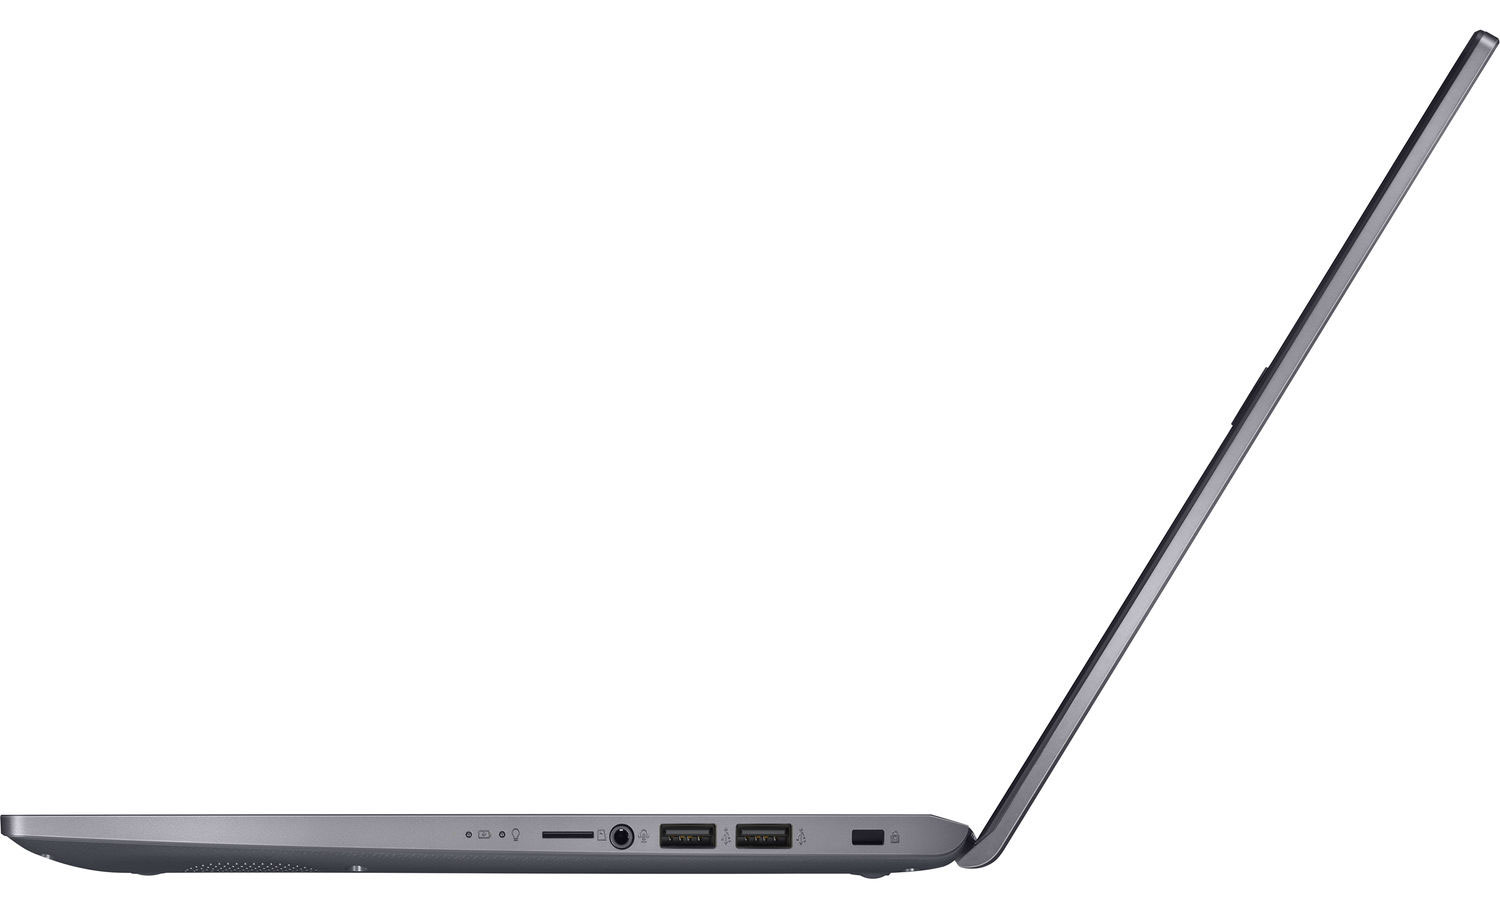 ASUS X509FA 10th Gen Core i3 Laptop With 8GB RAM & 512GB SSD